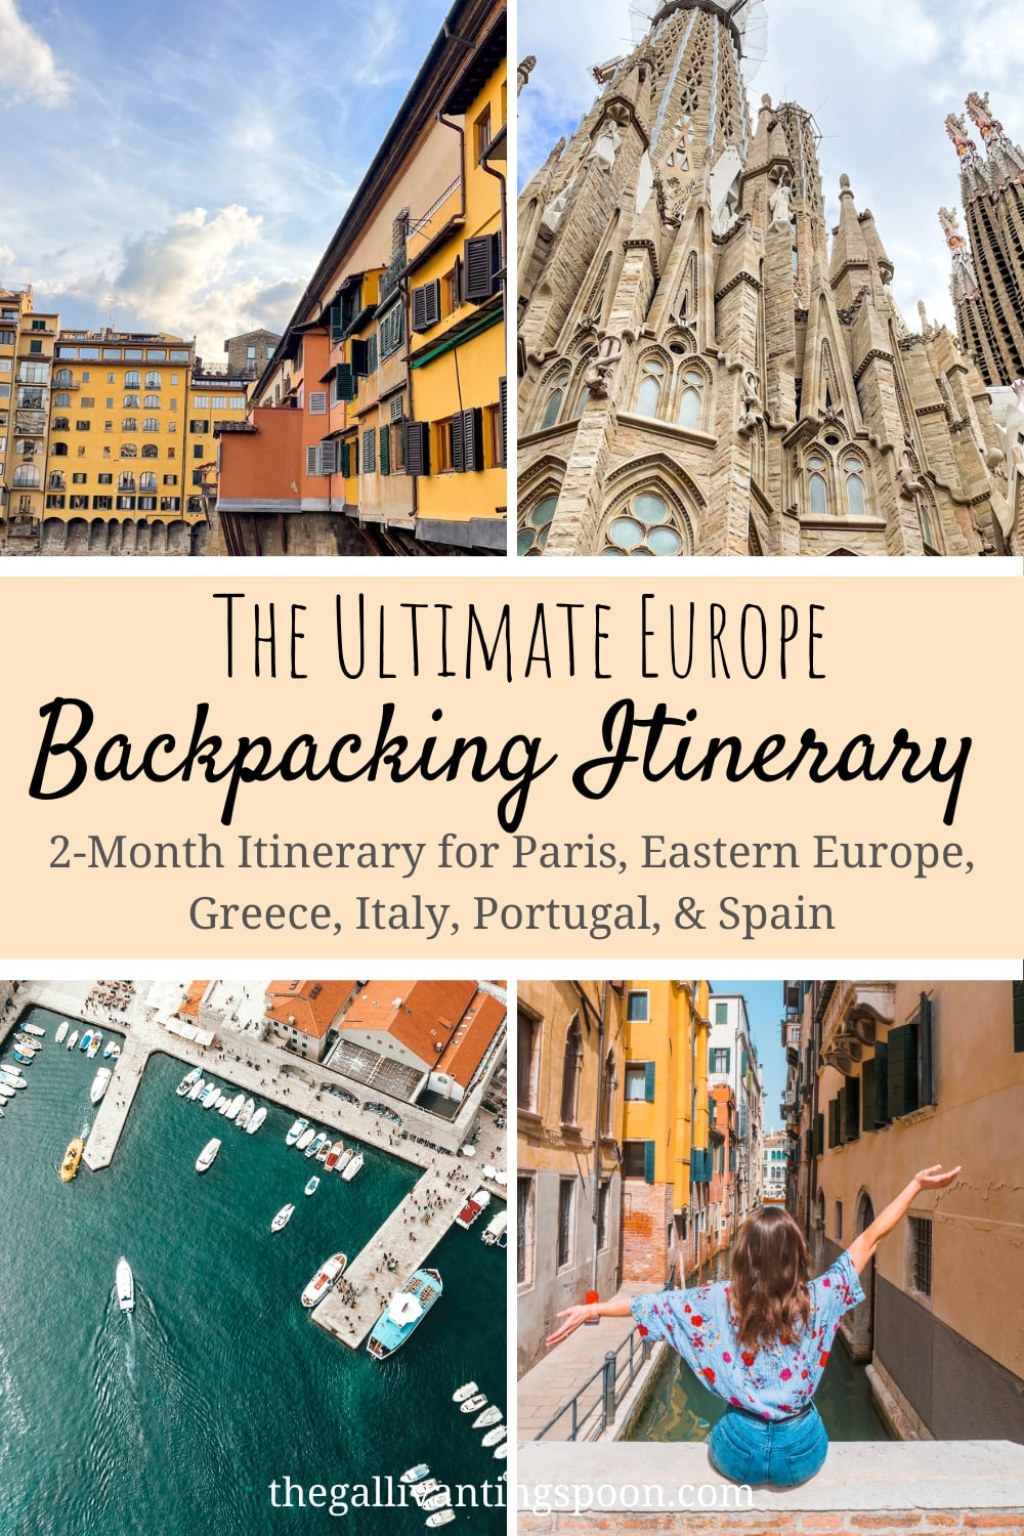 europe trip itinerary 2 months - The Ultimate -Month Europe Backpacking Trip - The Gallivanting Spoon